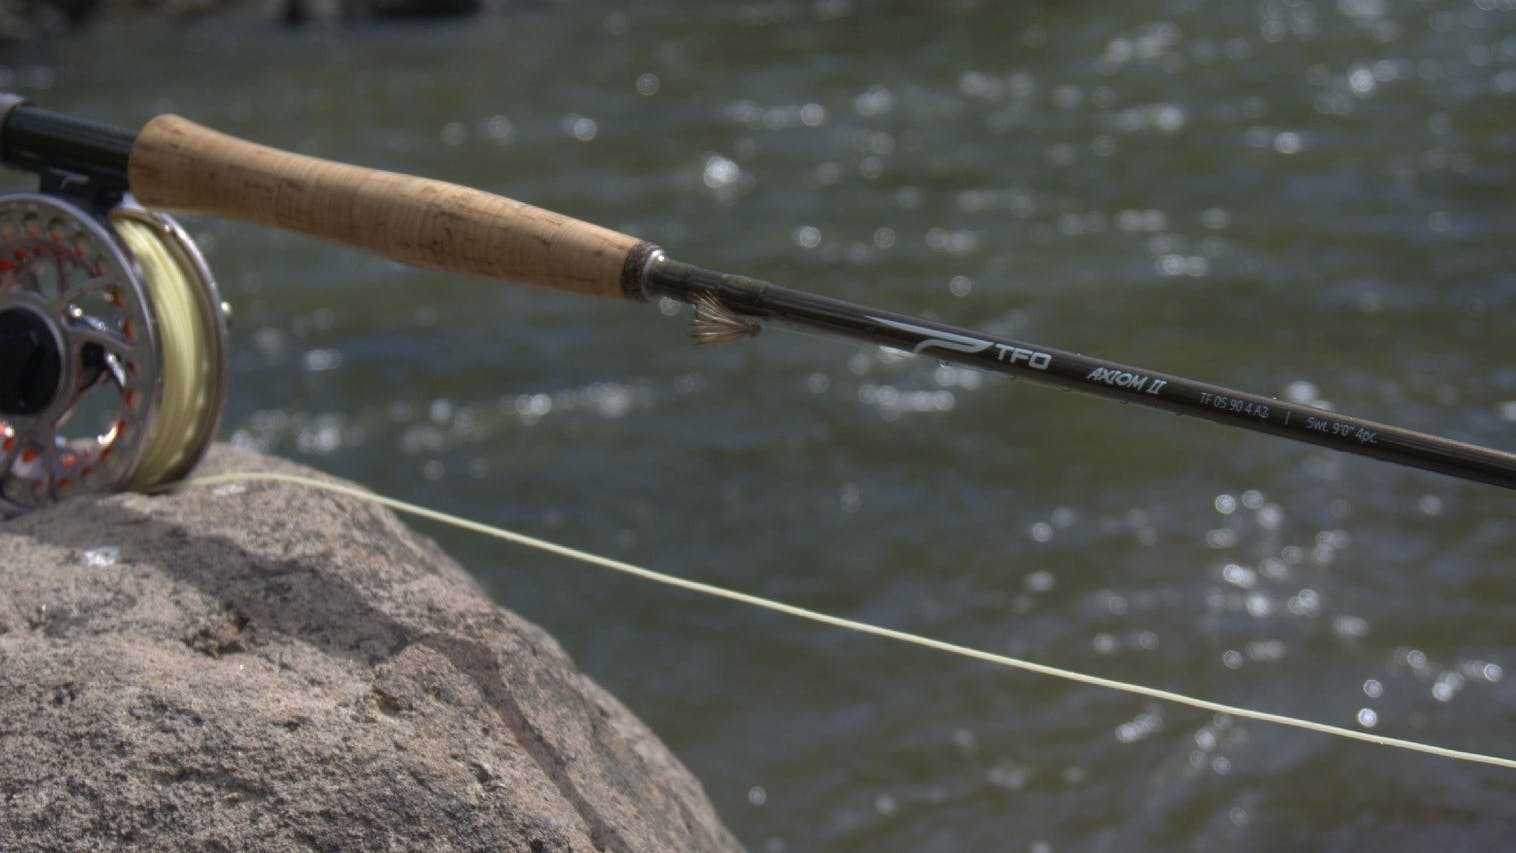 The Temple Fork Outfitters Axiom 2 Fly Rod.